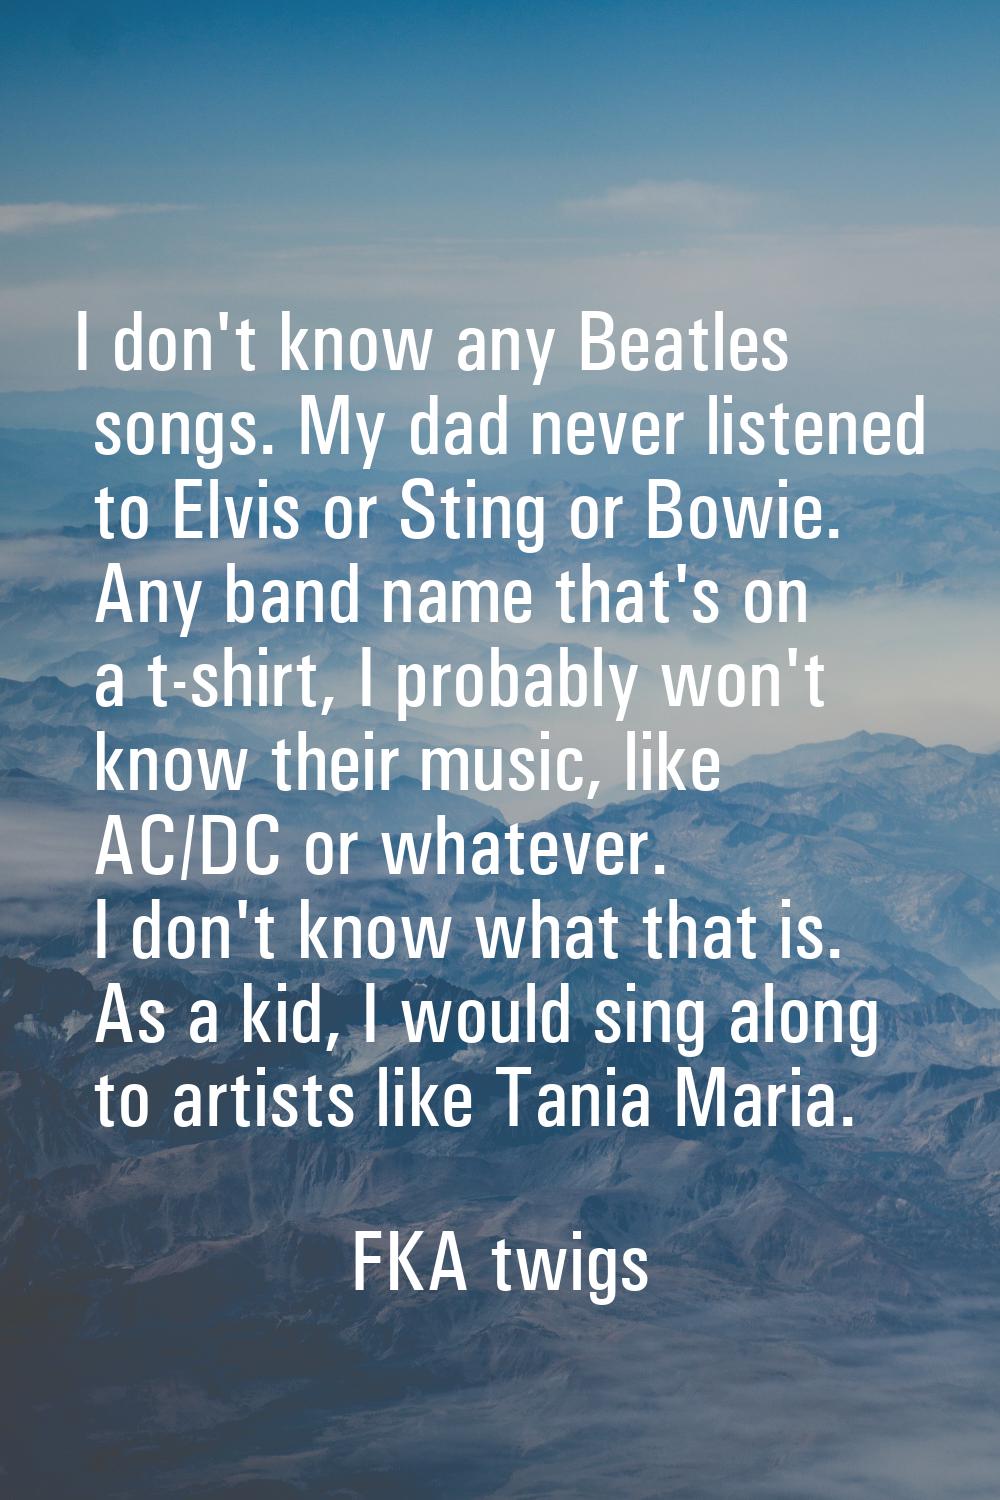 I don't know any Beatles songs. My dad never listened to Elvis or Sting or Bowie. Any band name tha